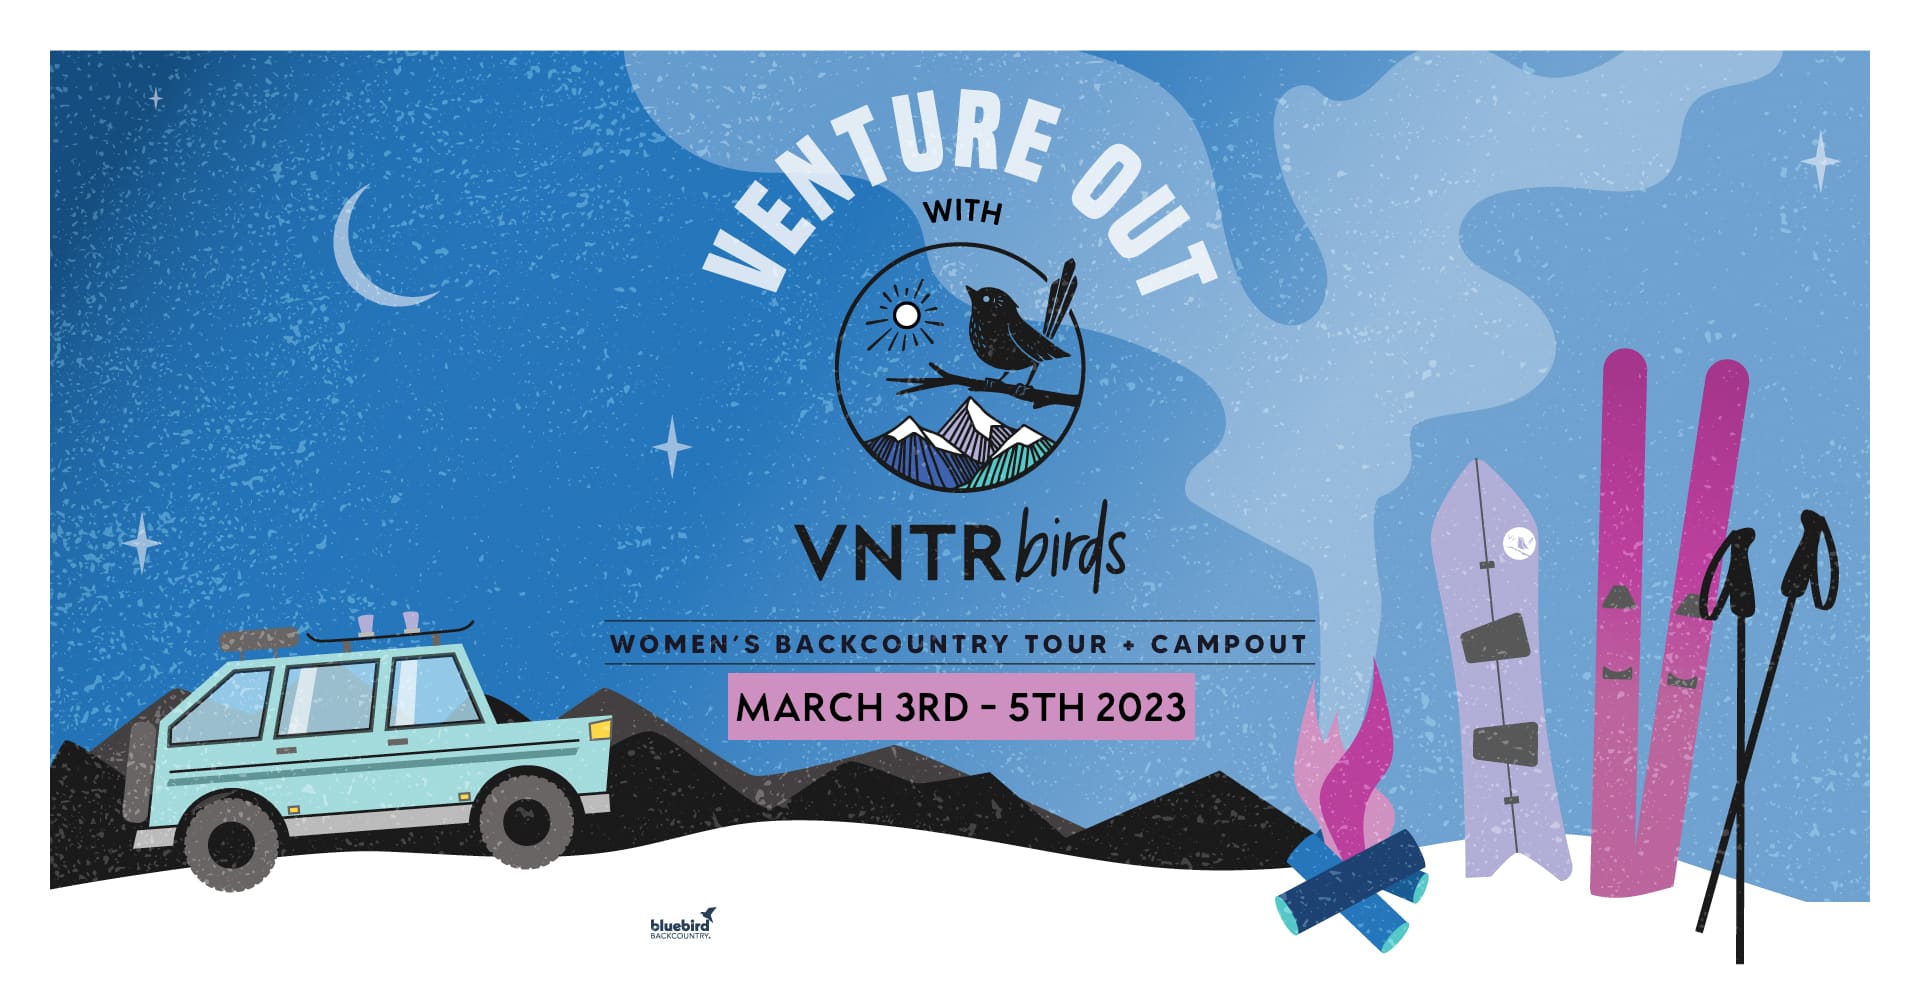 women's backcountry festival and campout!